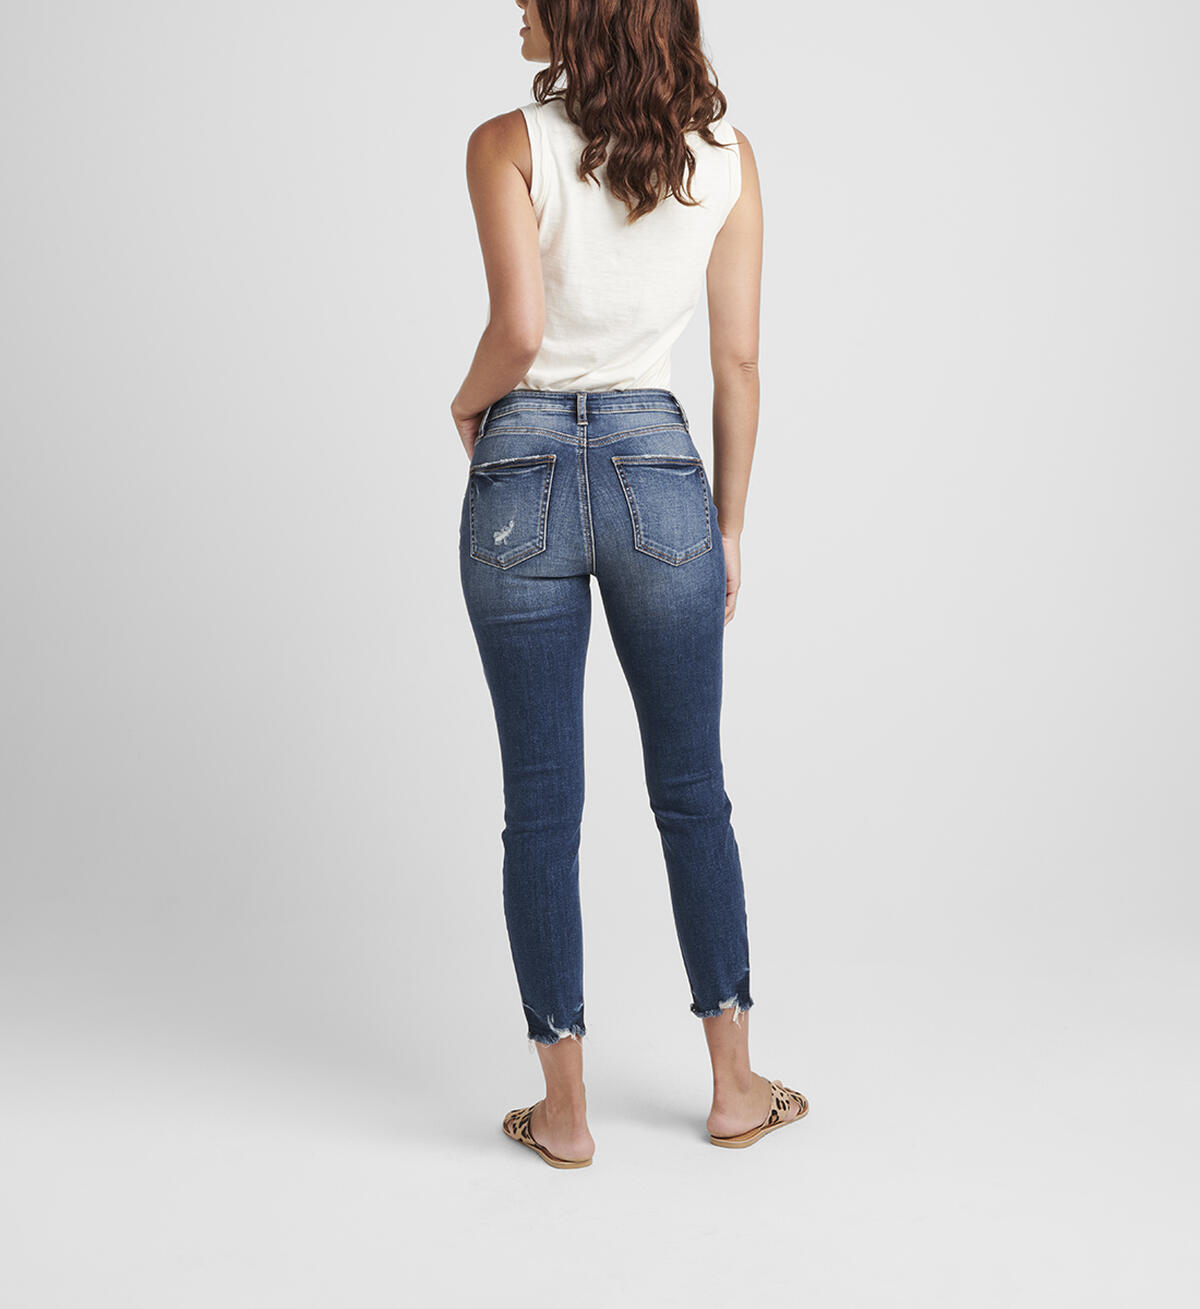 Avery High Rise Skinny Crop Jeans, , hi-res image number 1